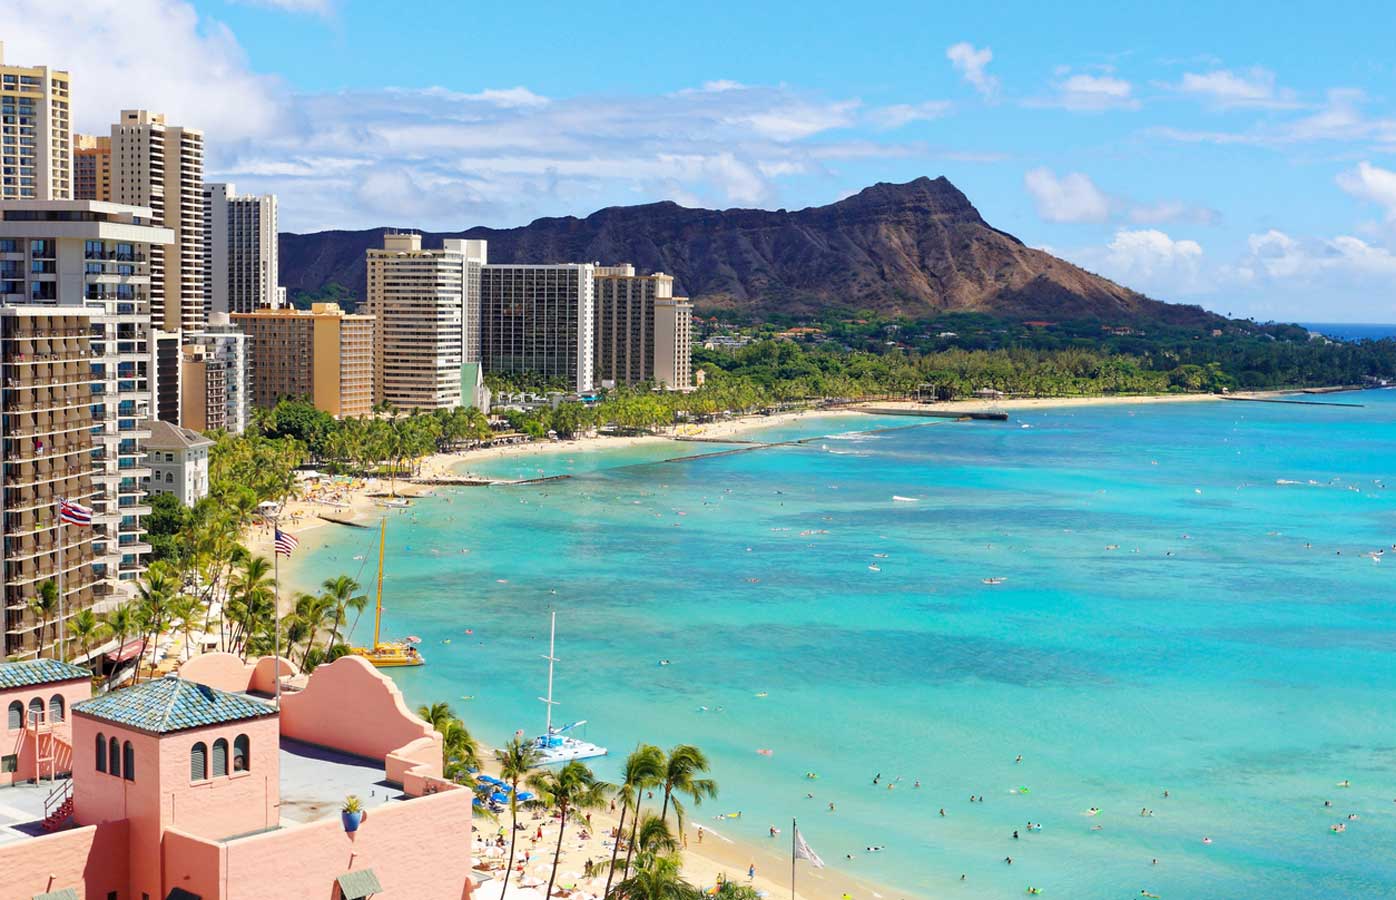 Hawaii's Waikiki Beach could soon be underwater because of climate